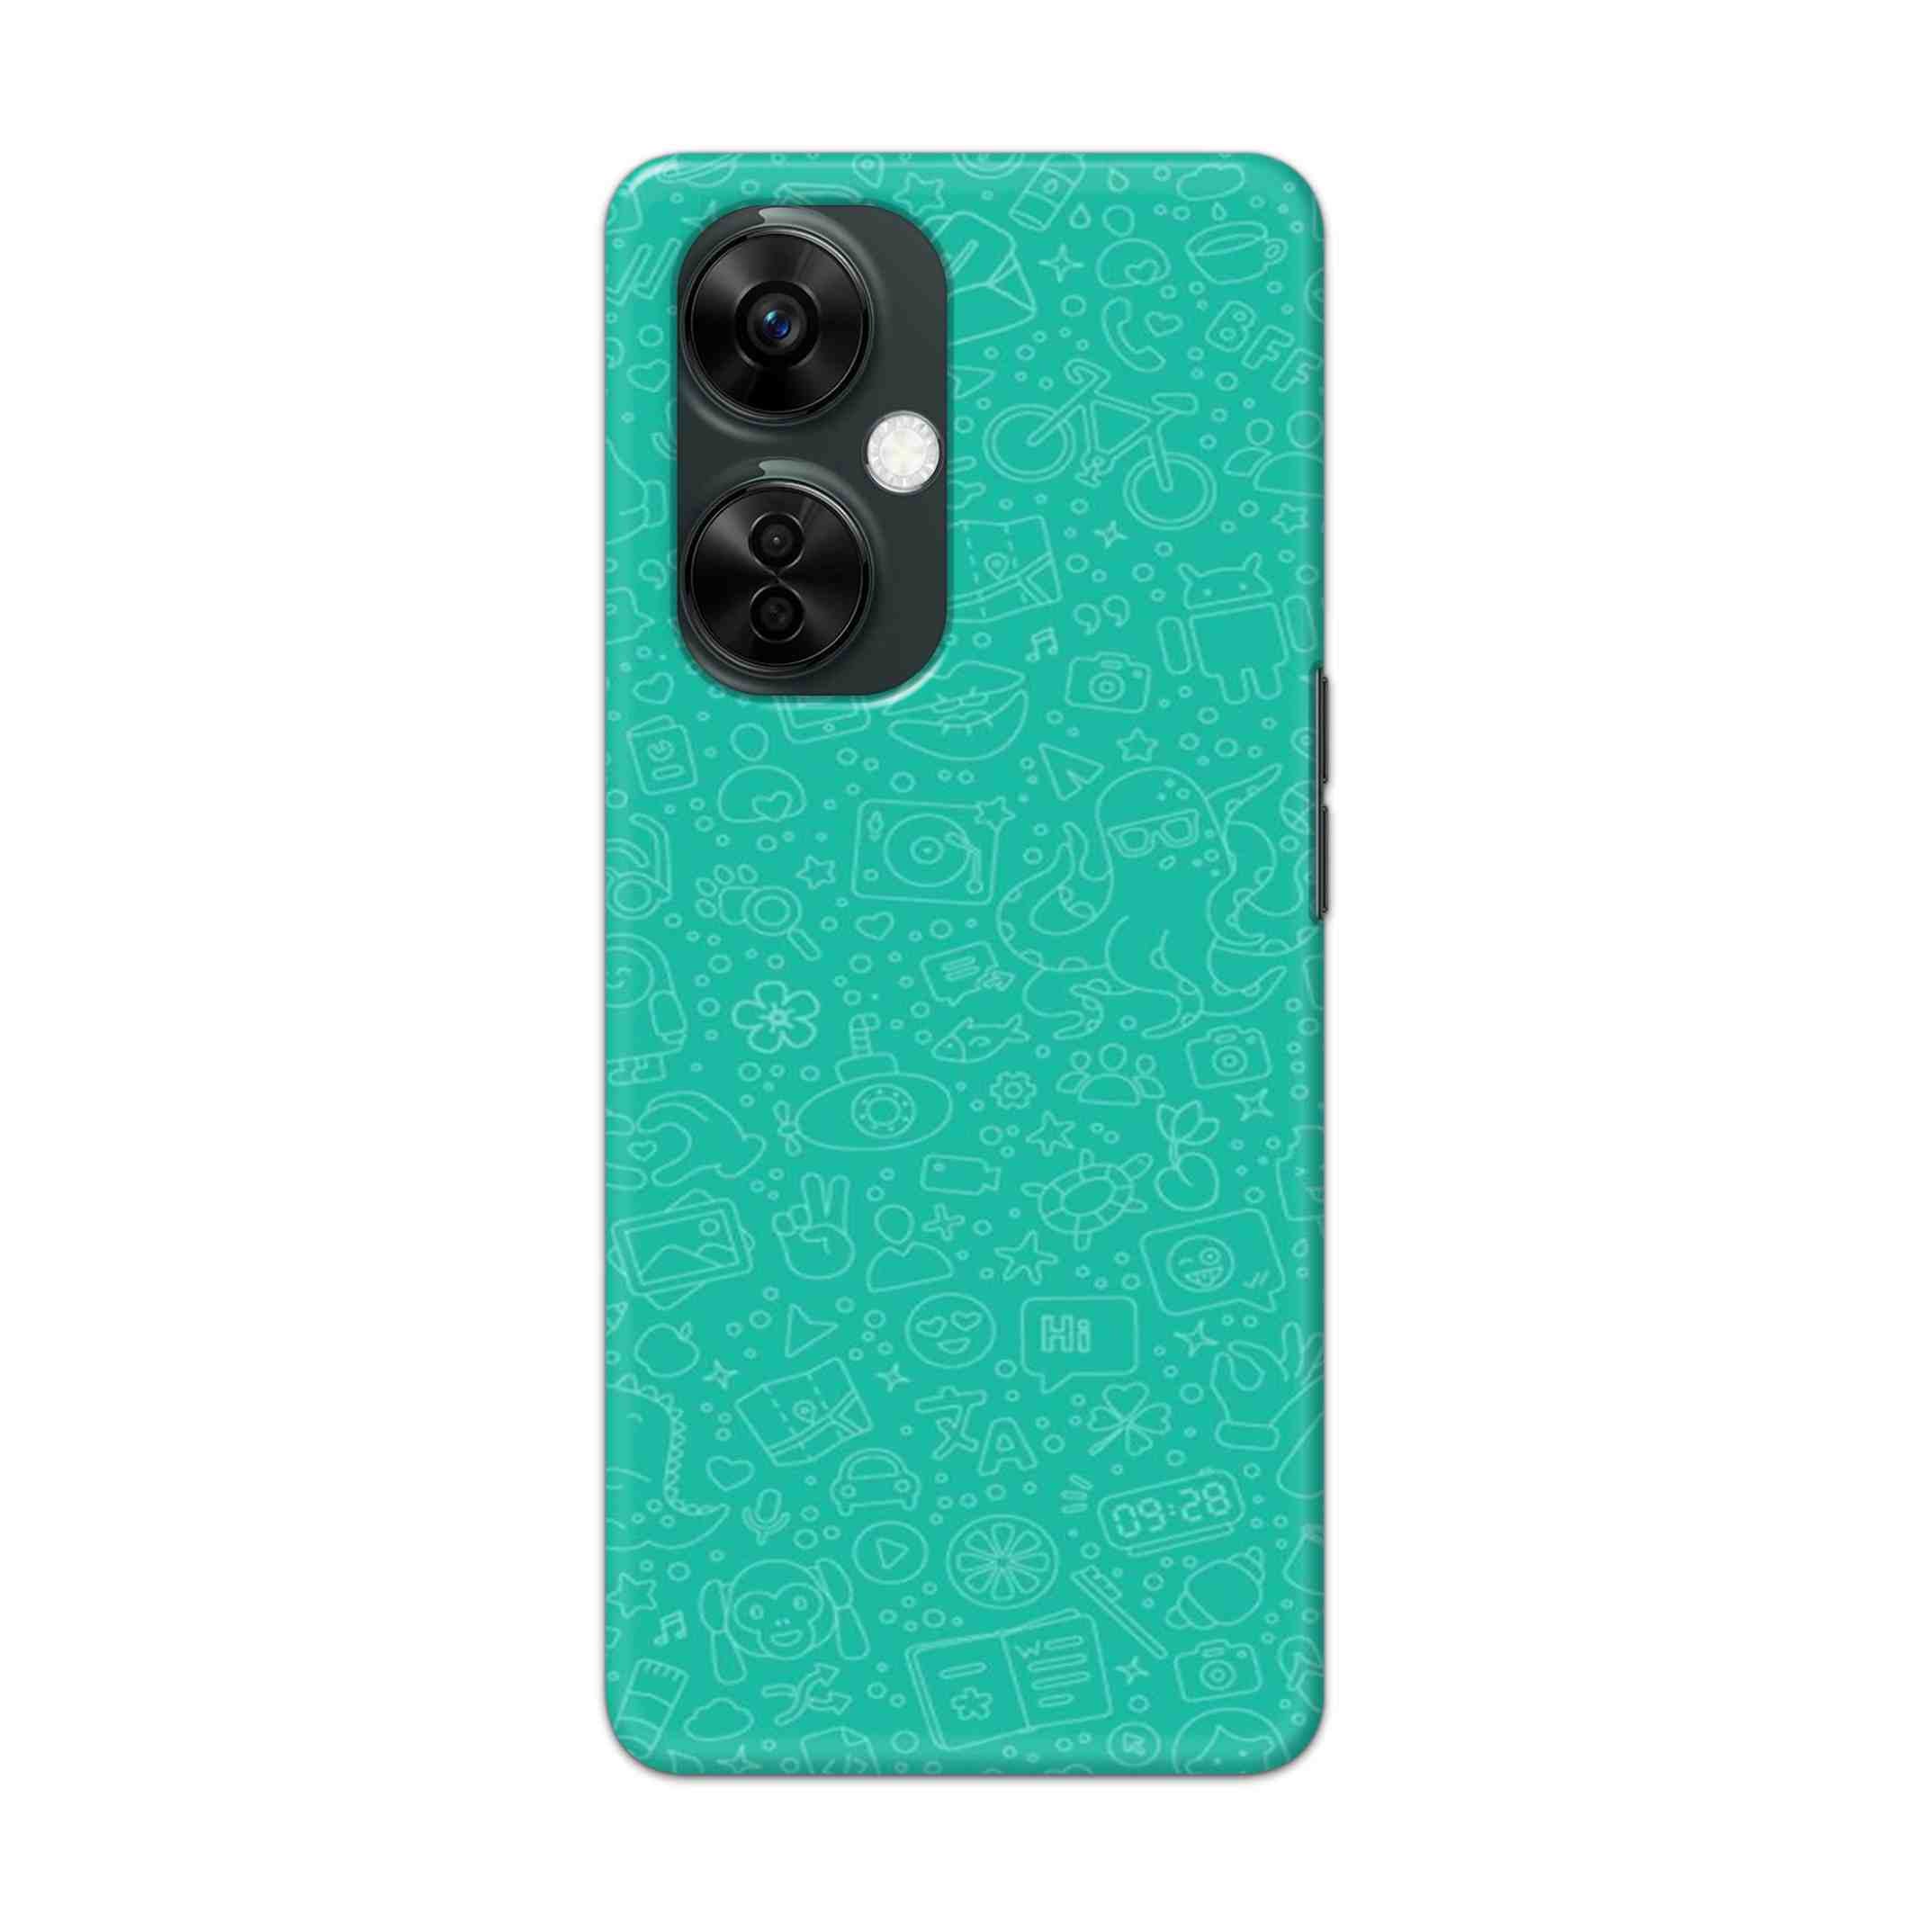 Buy Whatsapp Hard Back Mobile Phone Case Cover For Oneplus Nord CE 3 Lite Online